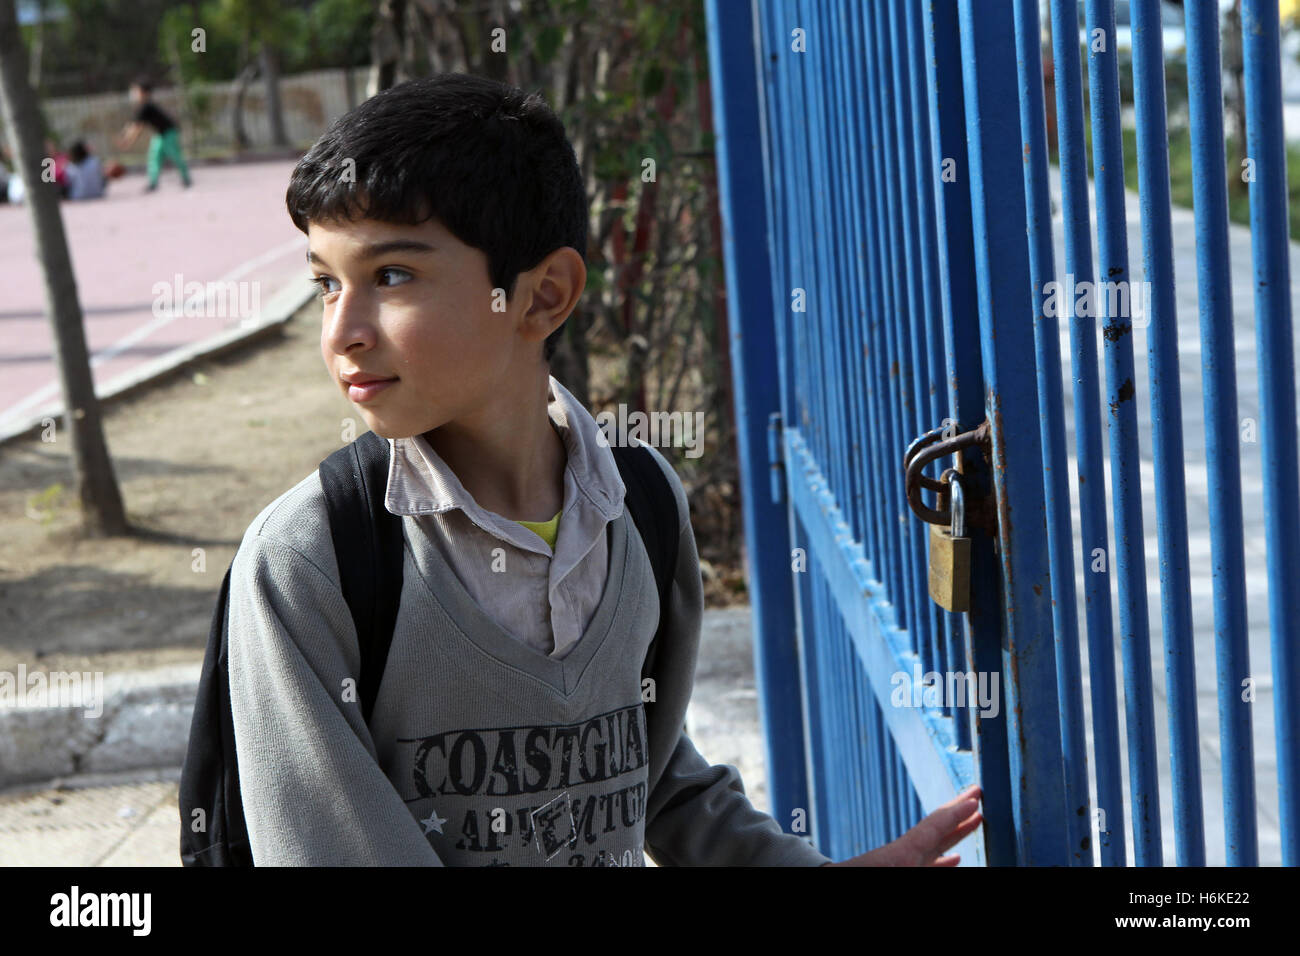 Athens, Athens. 19th Oct, 2016. A young boy from Syria waits in the courtyard of the 2nd Tavros Elementary School to enter his classroom, in Athens, Greece on Oct. 19, 2016. Under the new refugee schooling program which was introduced in early October by the Greek Ministry of Education, a total of 10,000 refugee children aged 6 to 15 years old in Greece are expected to attend four-hour lessons every day in 150 schools all over Greece within the next few weeks. © Marios Lolos/Xinhua/Alamy Live News Stock Photo